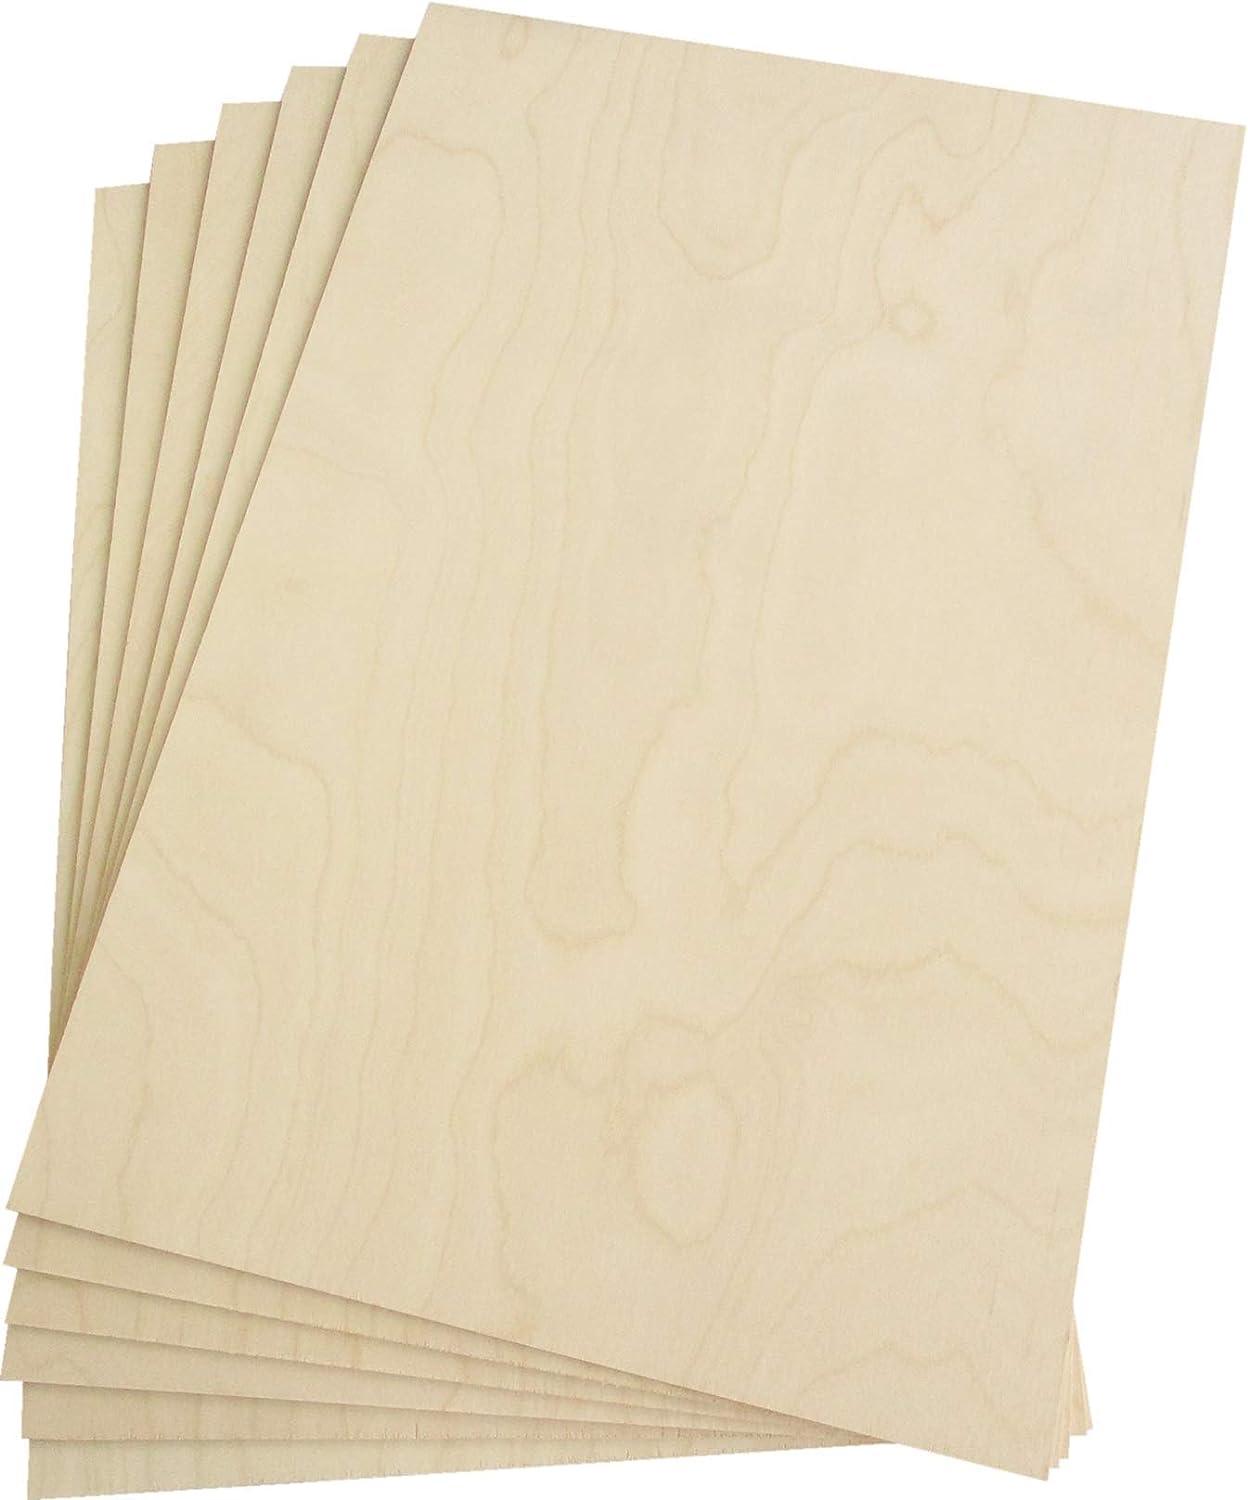 Baltic Birch Plywood Sheets for Laser Cutting and Engraving (3